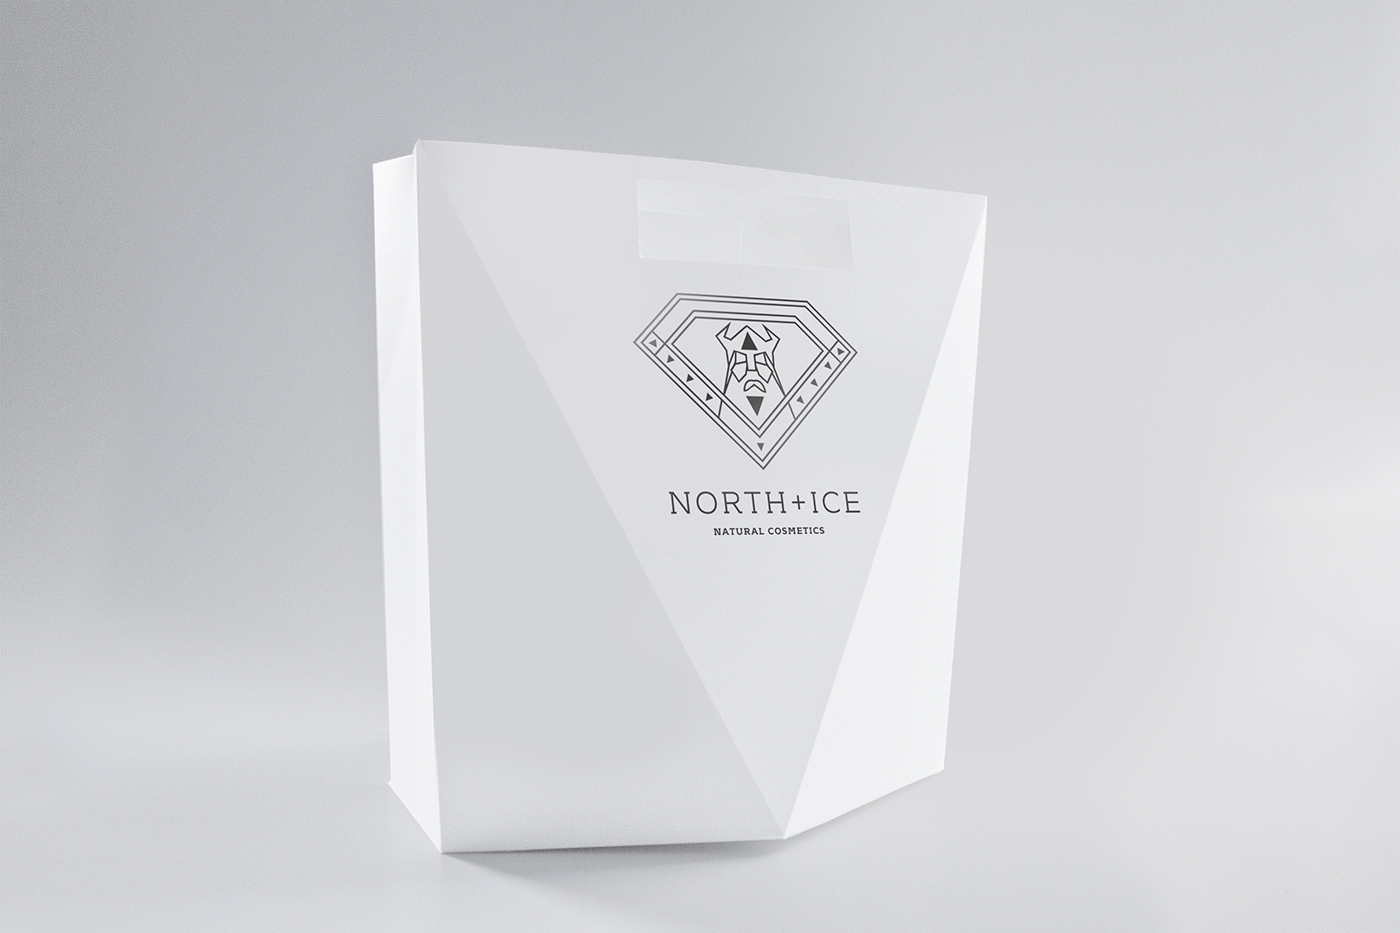 Packaging ice north products Nature cosmetics brands beautyful Scandinavia iceland